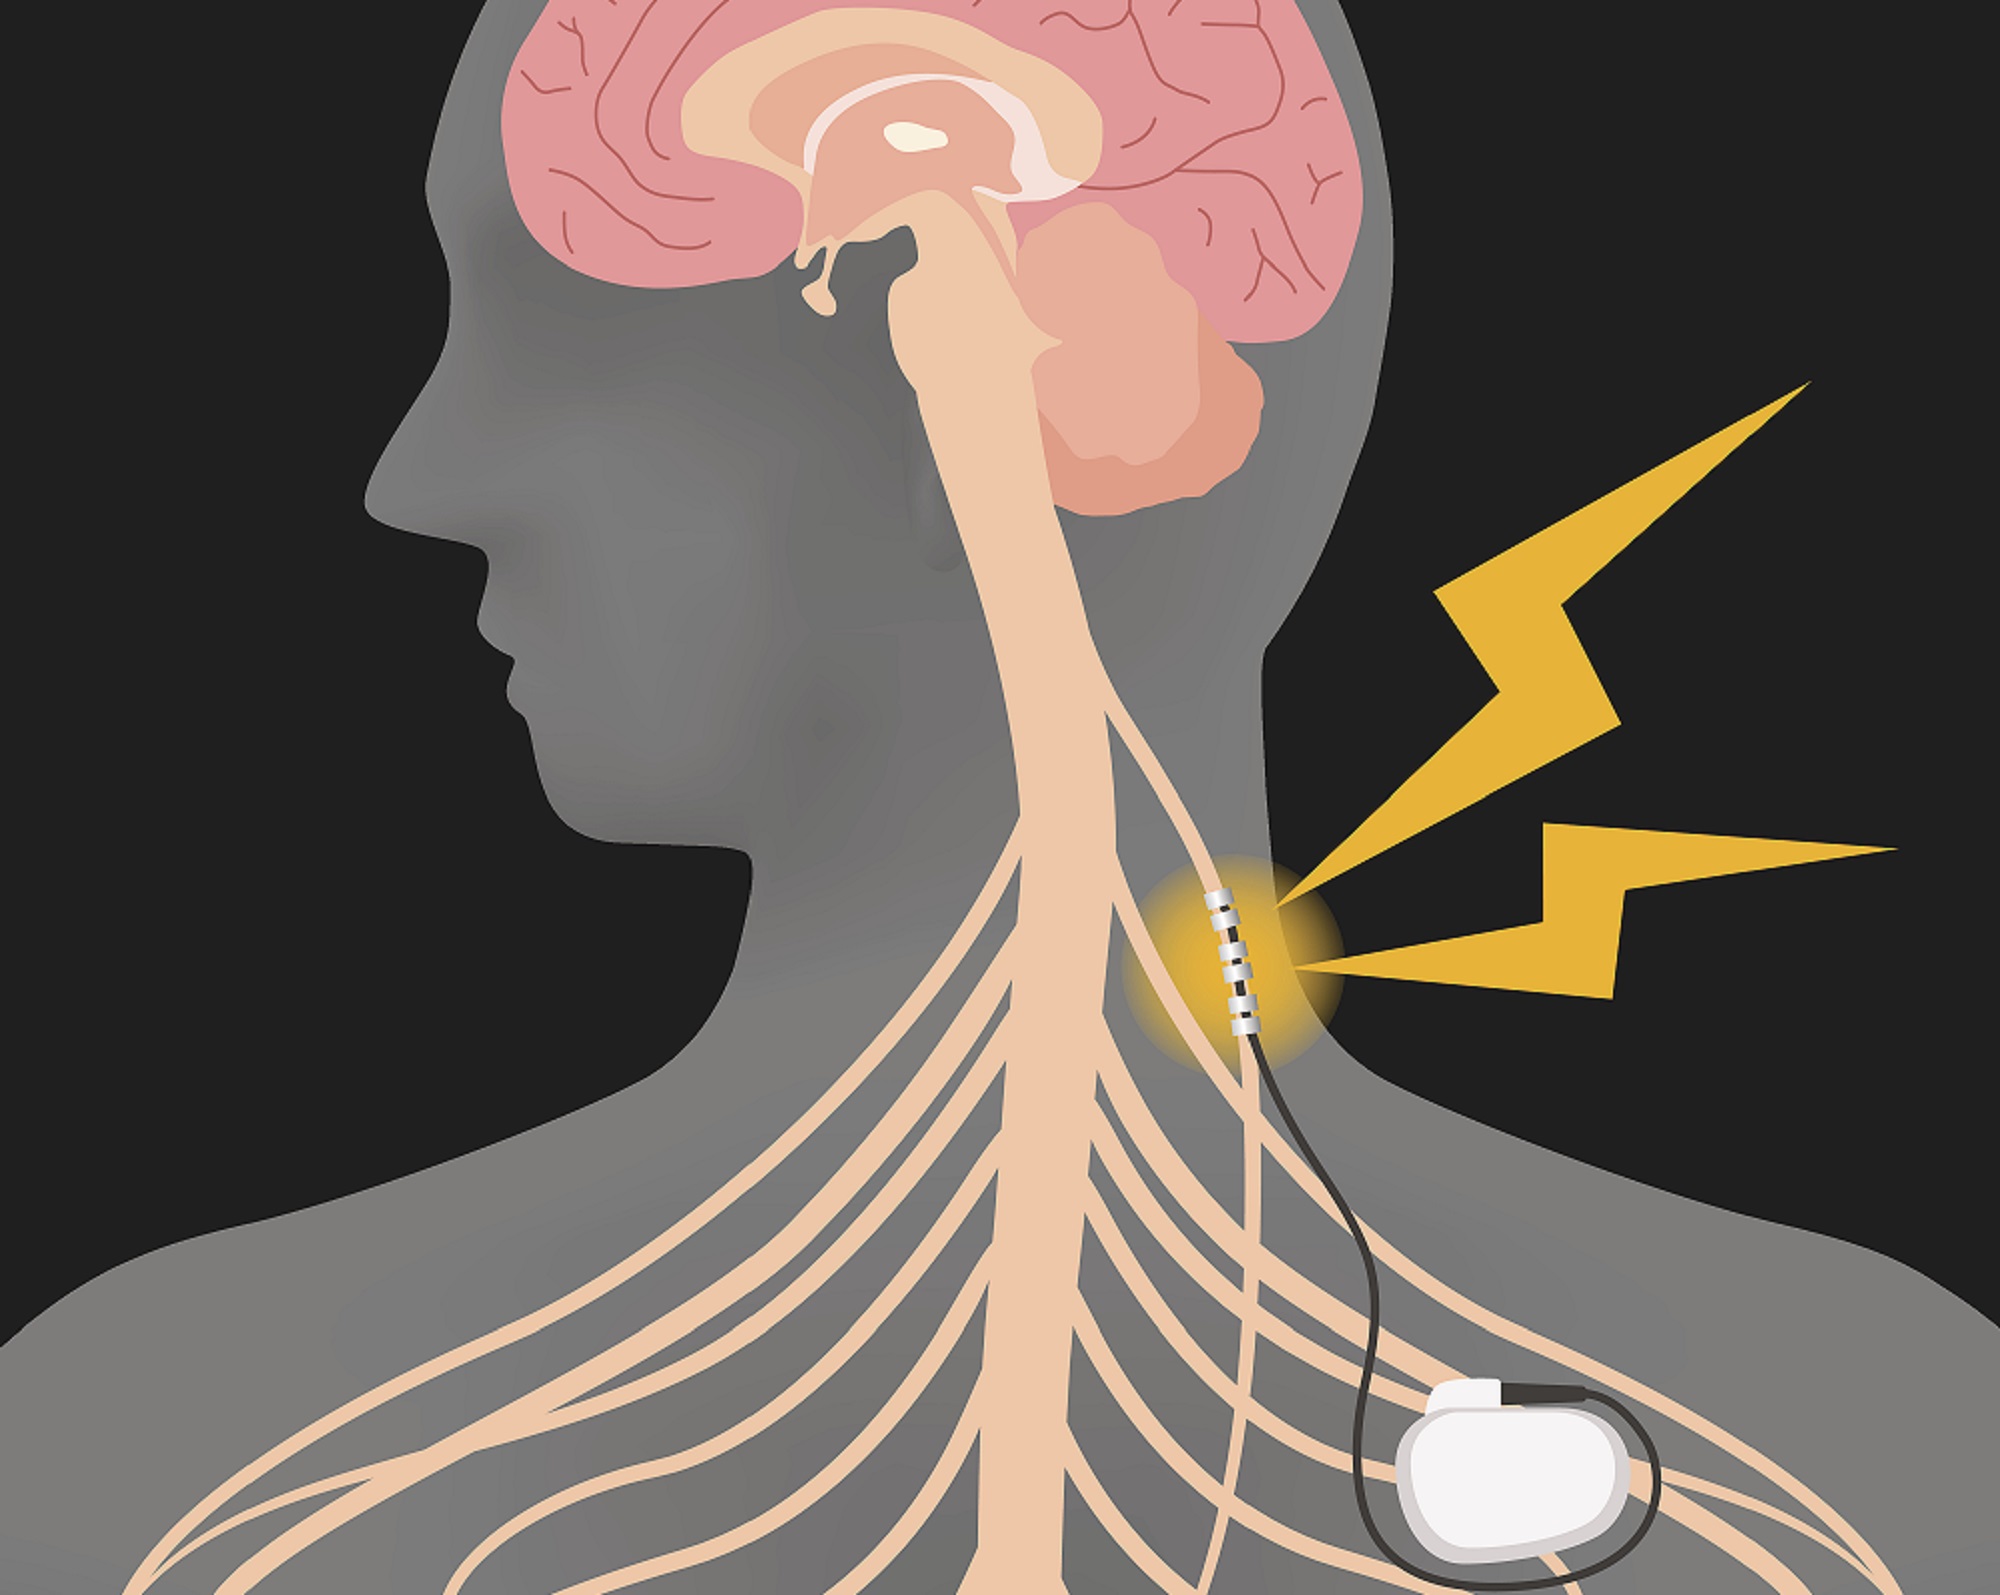 Vagus Nerve Stimulation in Pediatric Epilepsy: Weighing the Risks and